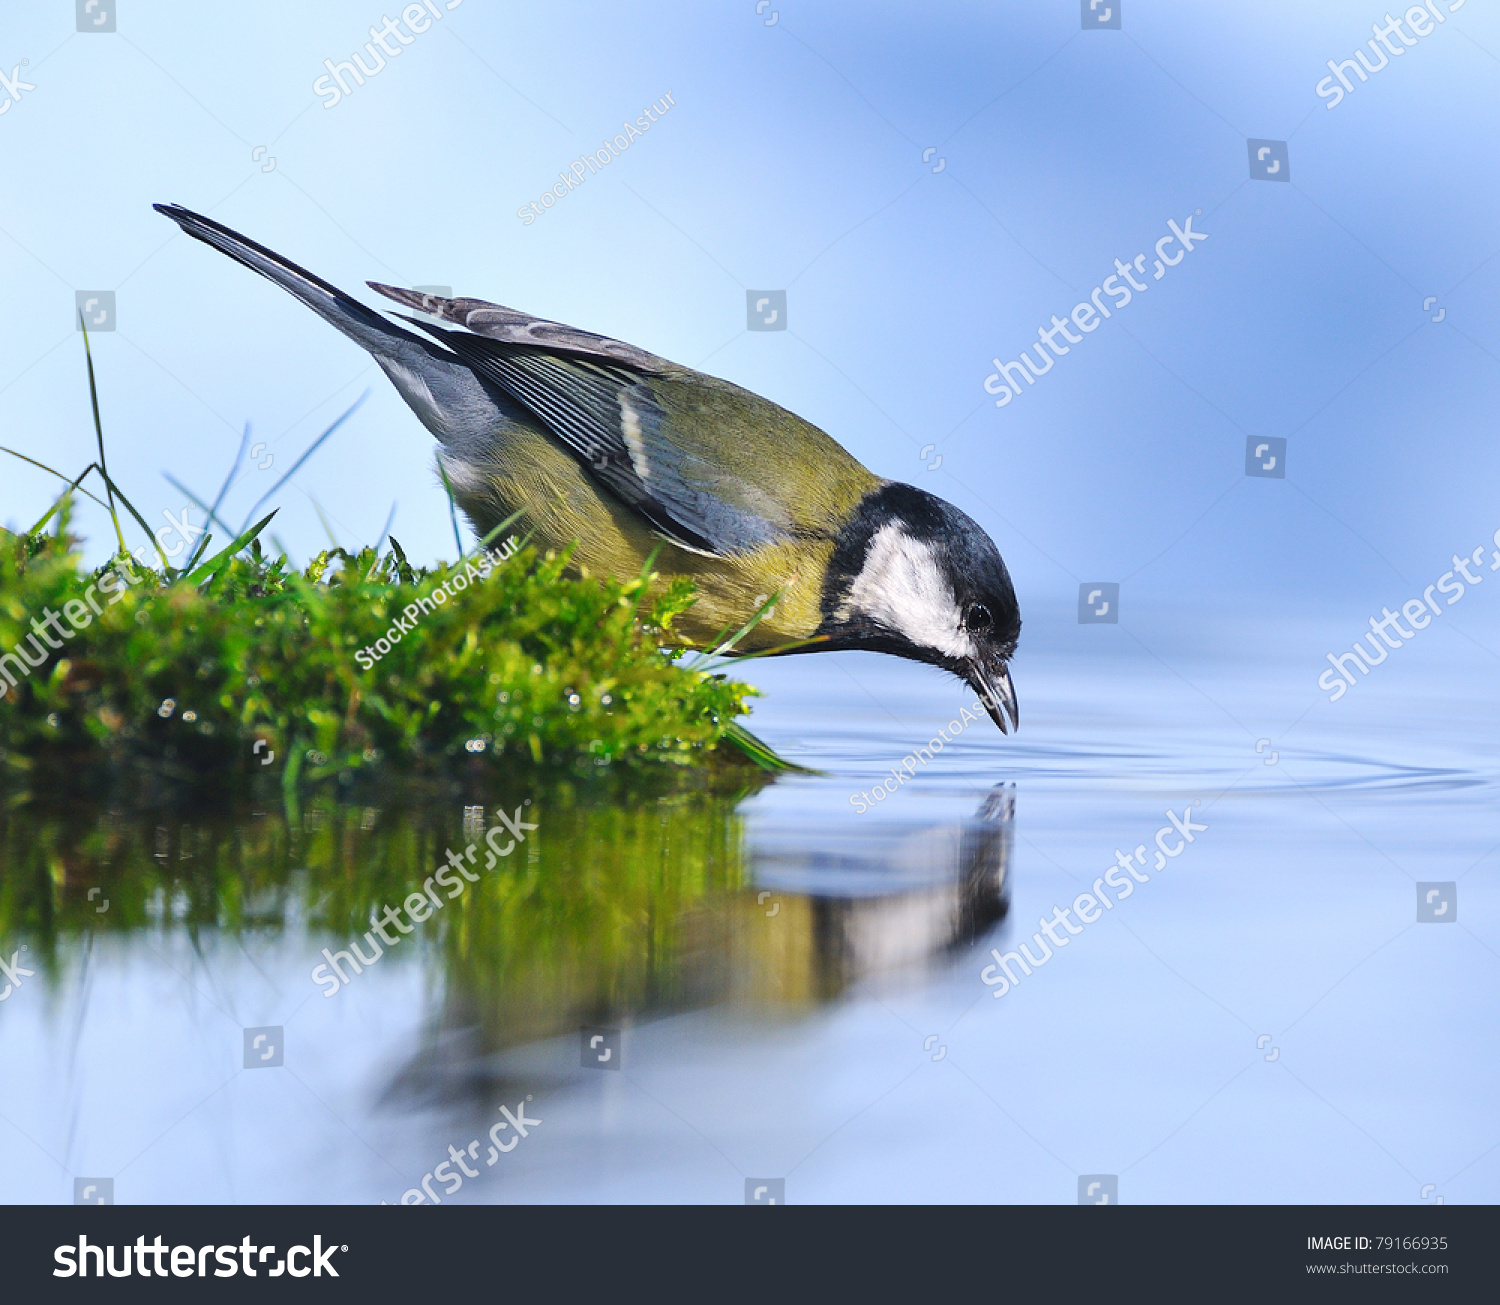 Thirsty Bird On River Bank Stock Photo (Royalty Free) 79166935 ...